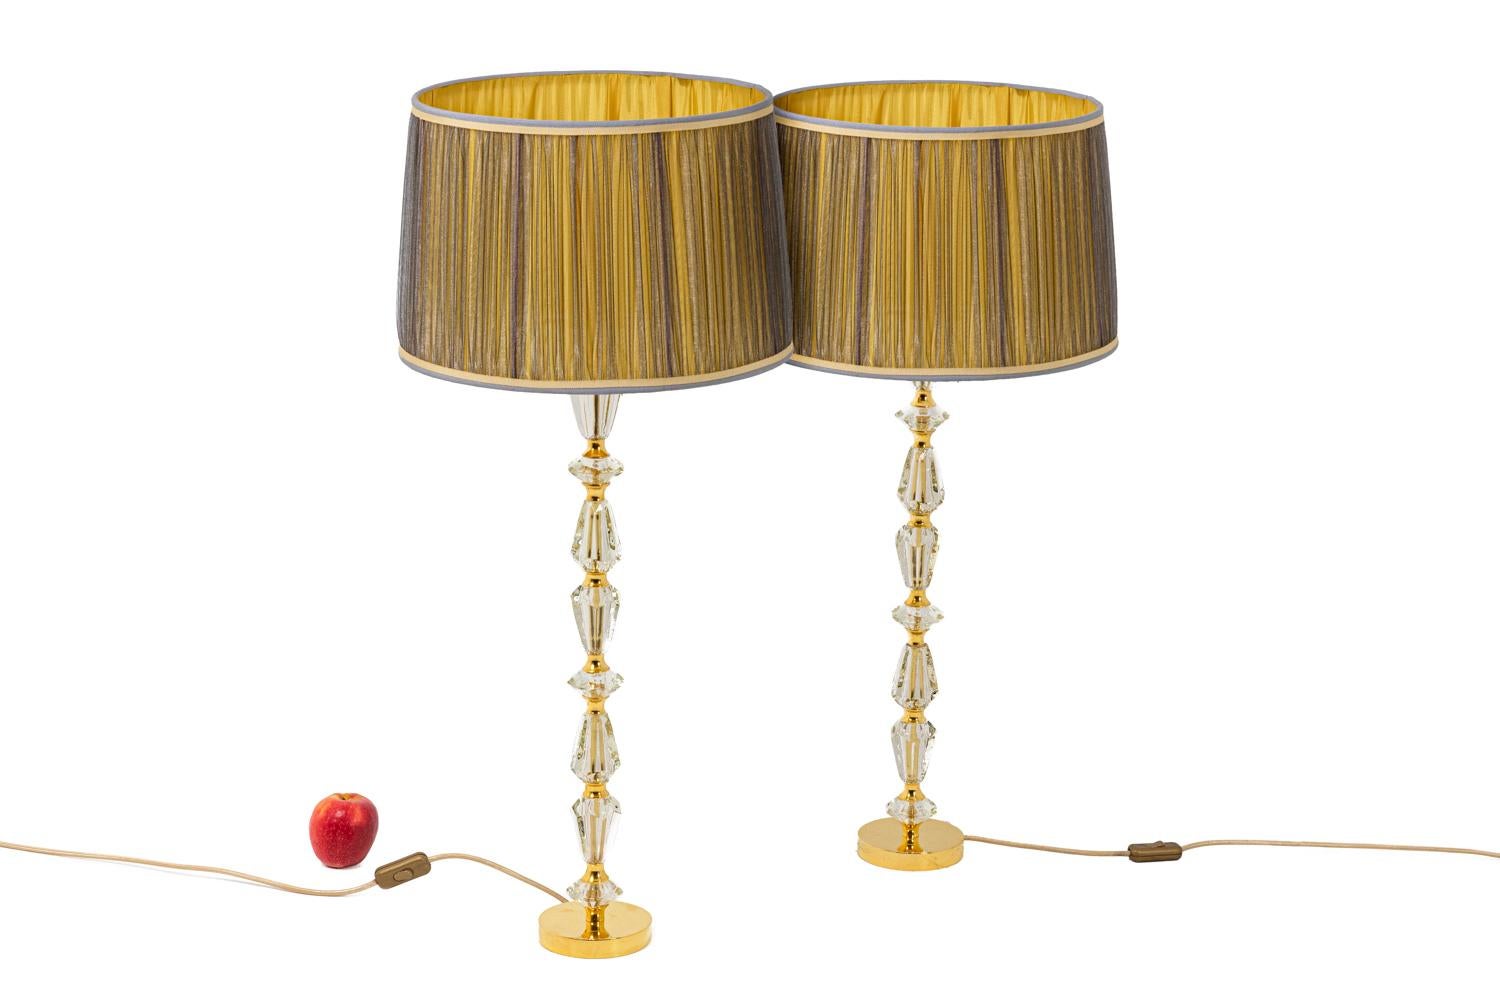 Pair of cylindric lamps composed by a row of conic elements in faceted glass separated by rings in gilt brass. Frame standing on a circular base in gilt bronze.

French work realized in the 1940s.

New and functional electric system.

!The price